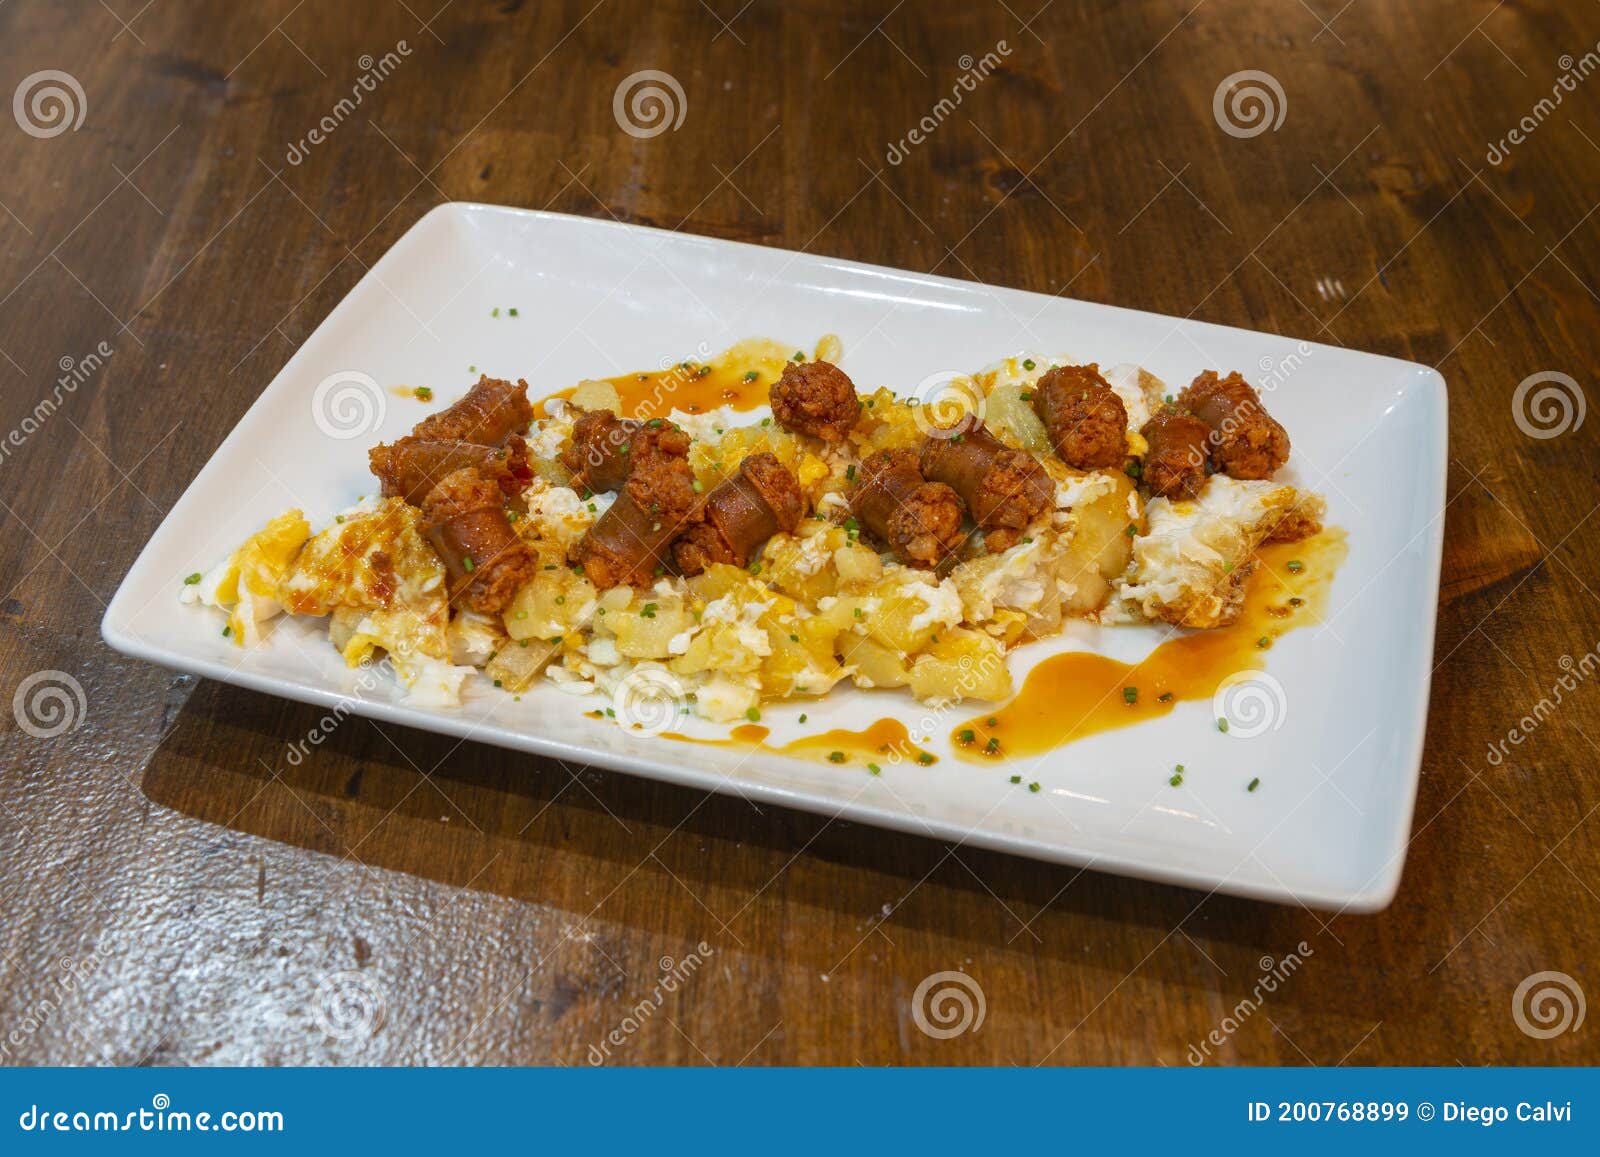 scrambled eggs with chorizo from teror